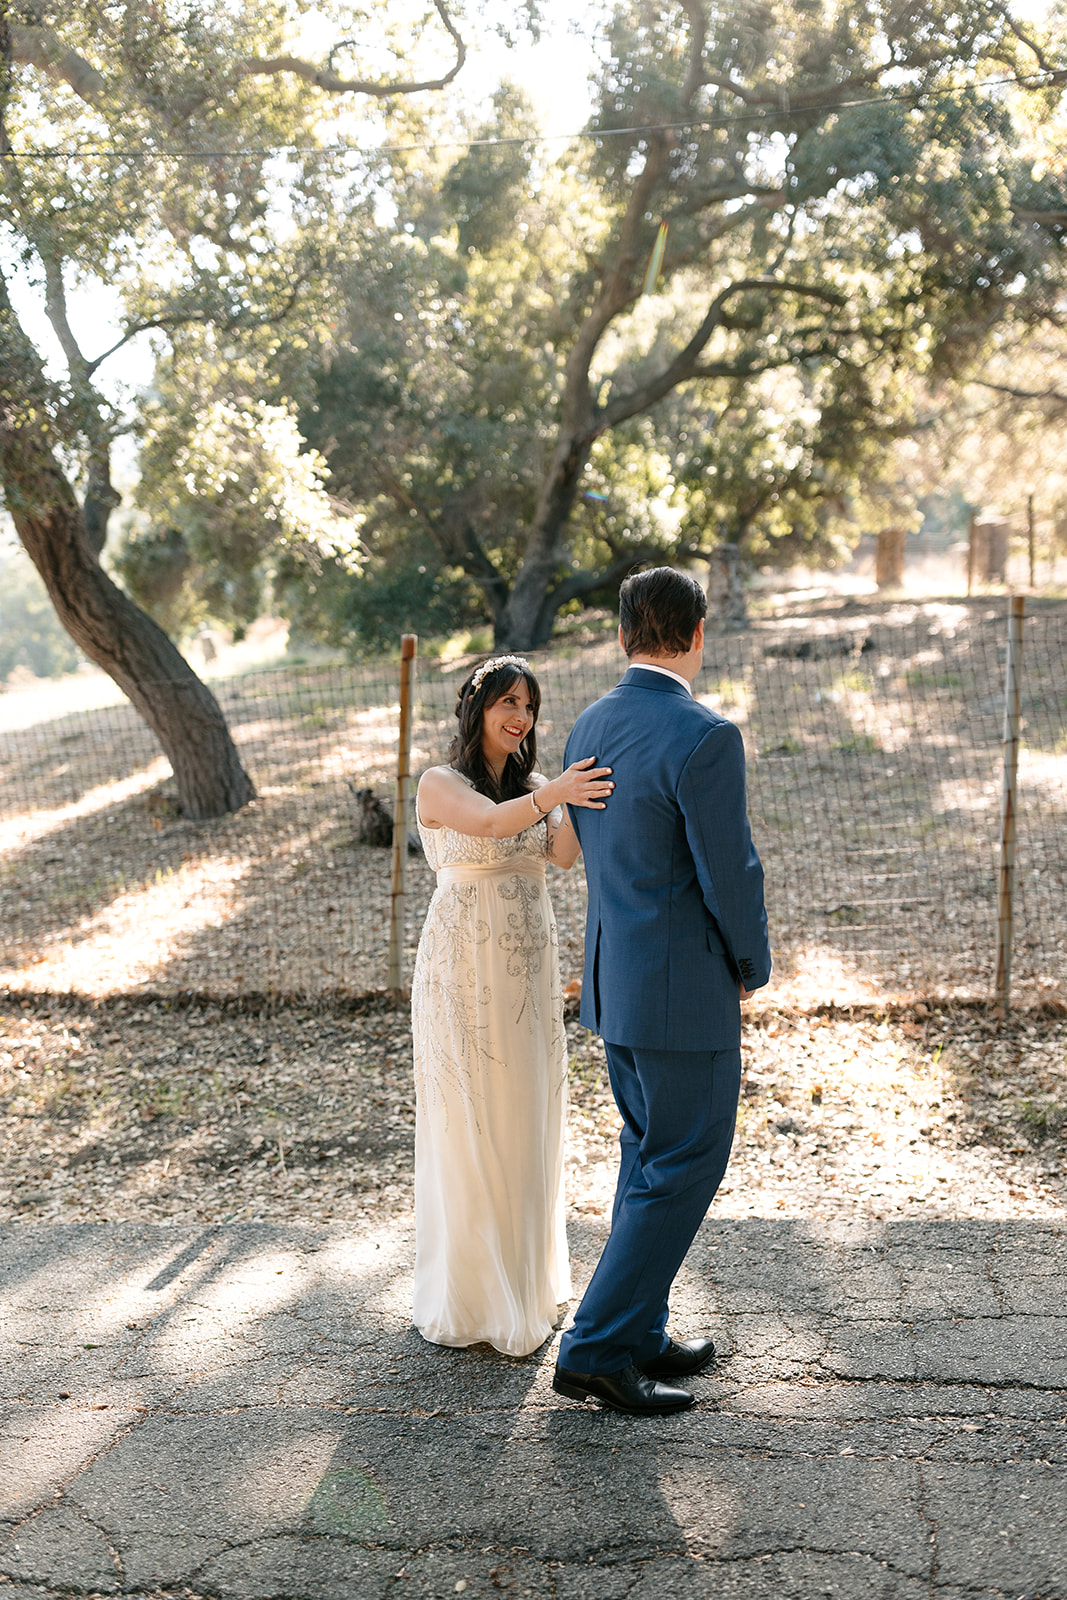 inn of the seventh ray wedding topanga california socal bride and groom pictures photos wedding photographer elopement